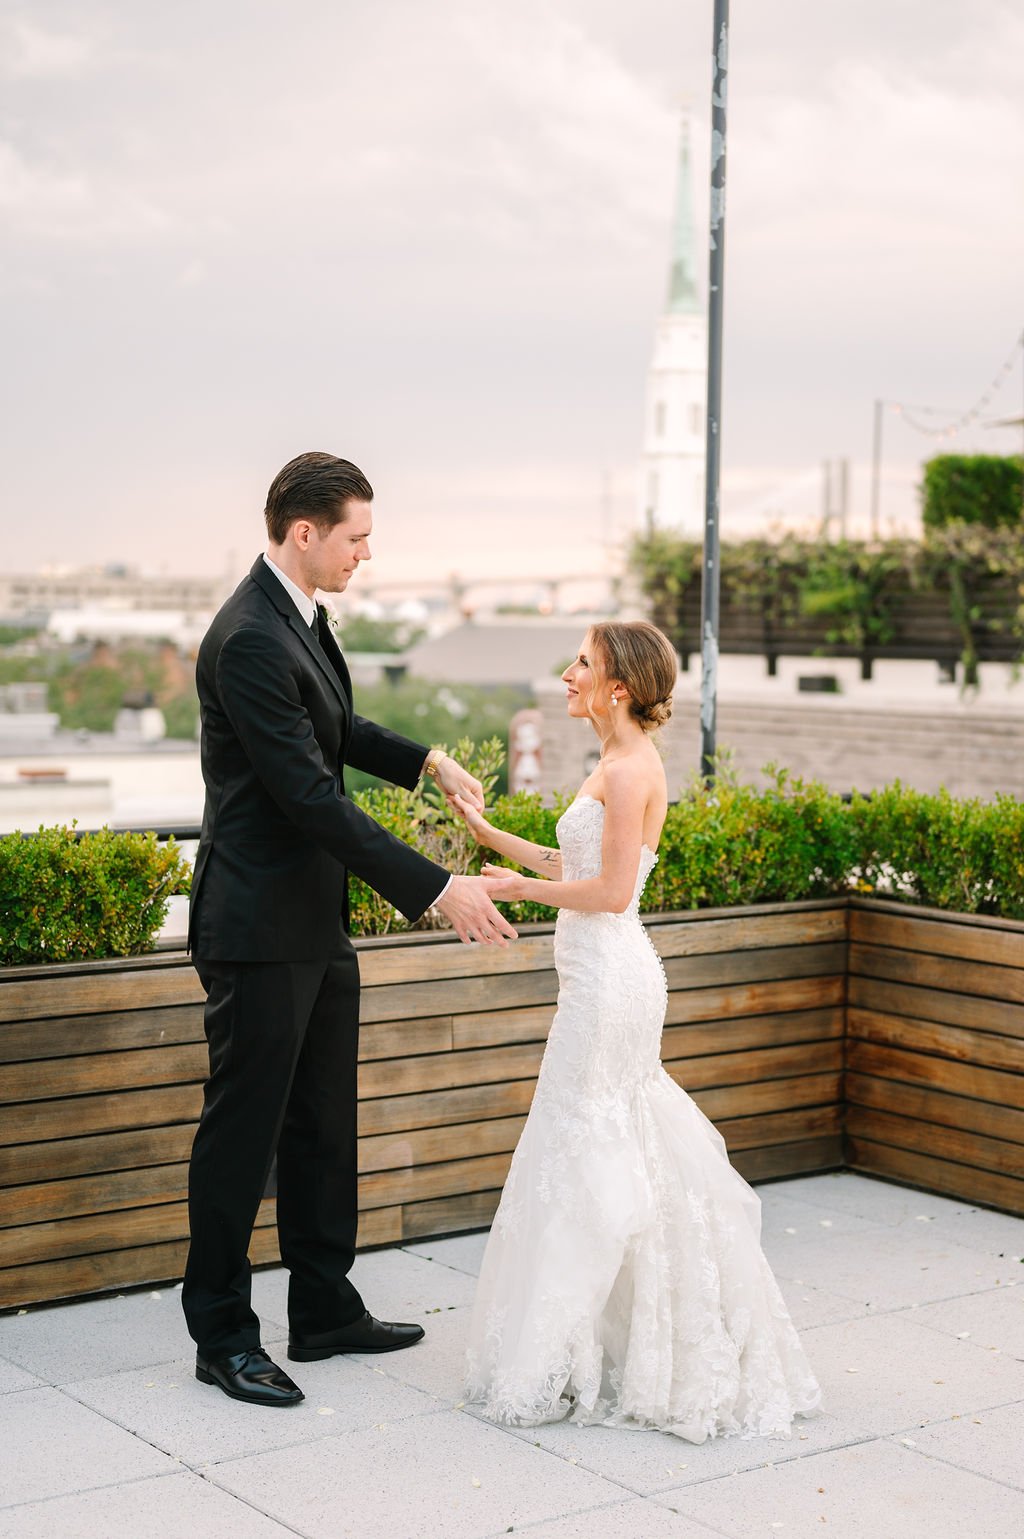 hayley-and-chris-romantic-rooftop-wedding-at-the-perry-lane-in-savannah-ga-featuring-organic-lush-wedding-florals-designed-by-ivory-and-beau-26.jpg